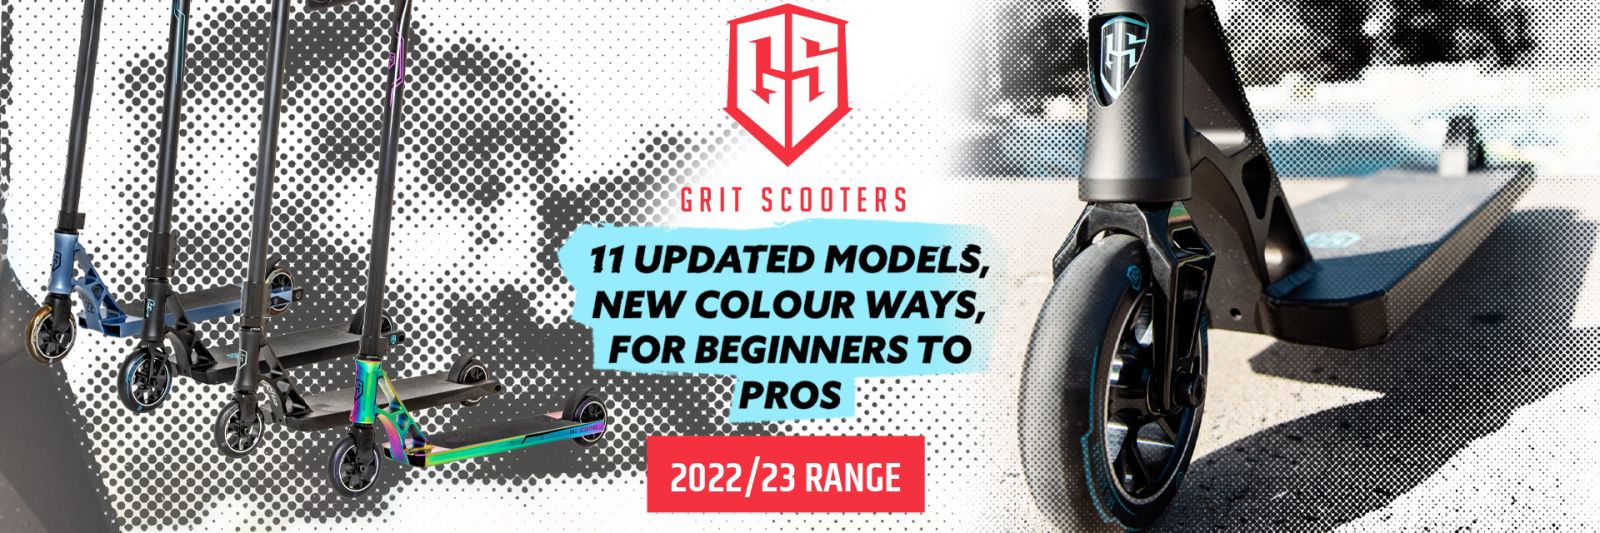 Grit Scooters 22 range